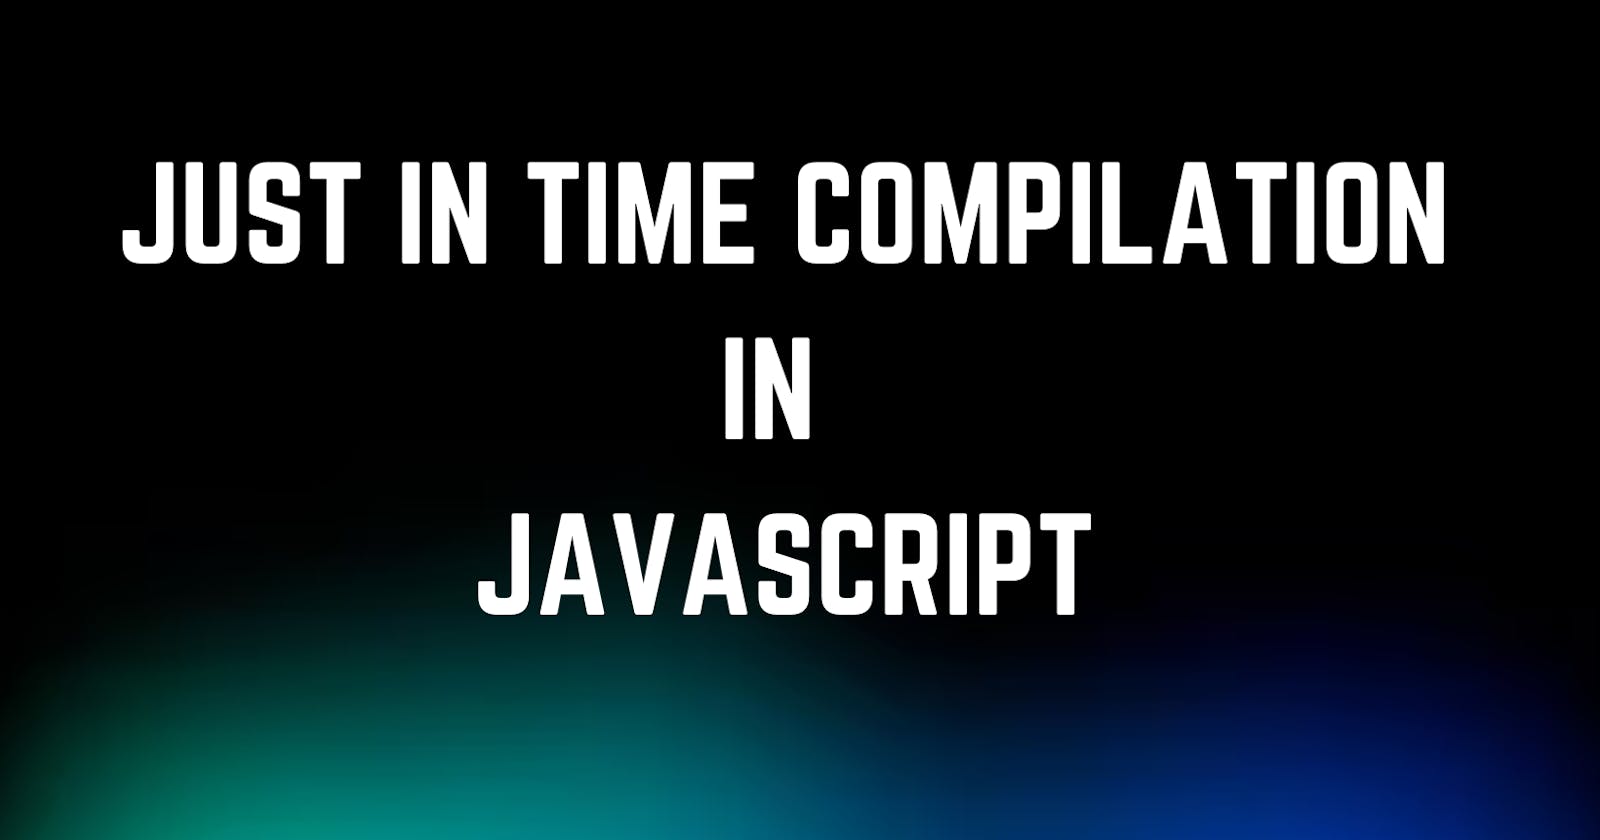 Just In Time Compilation in JavaScript